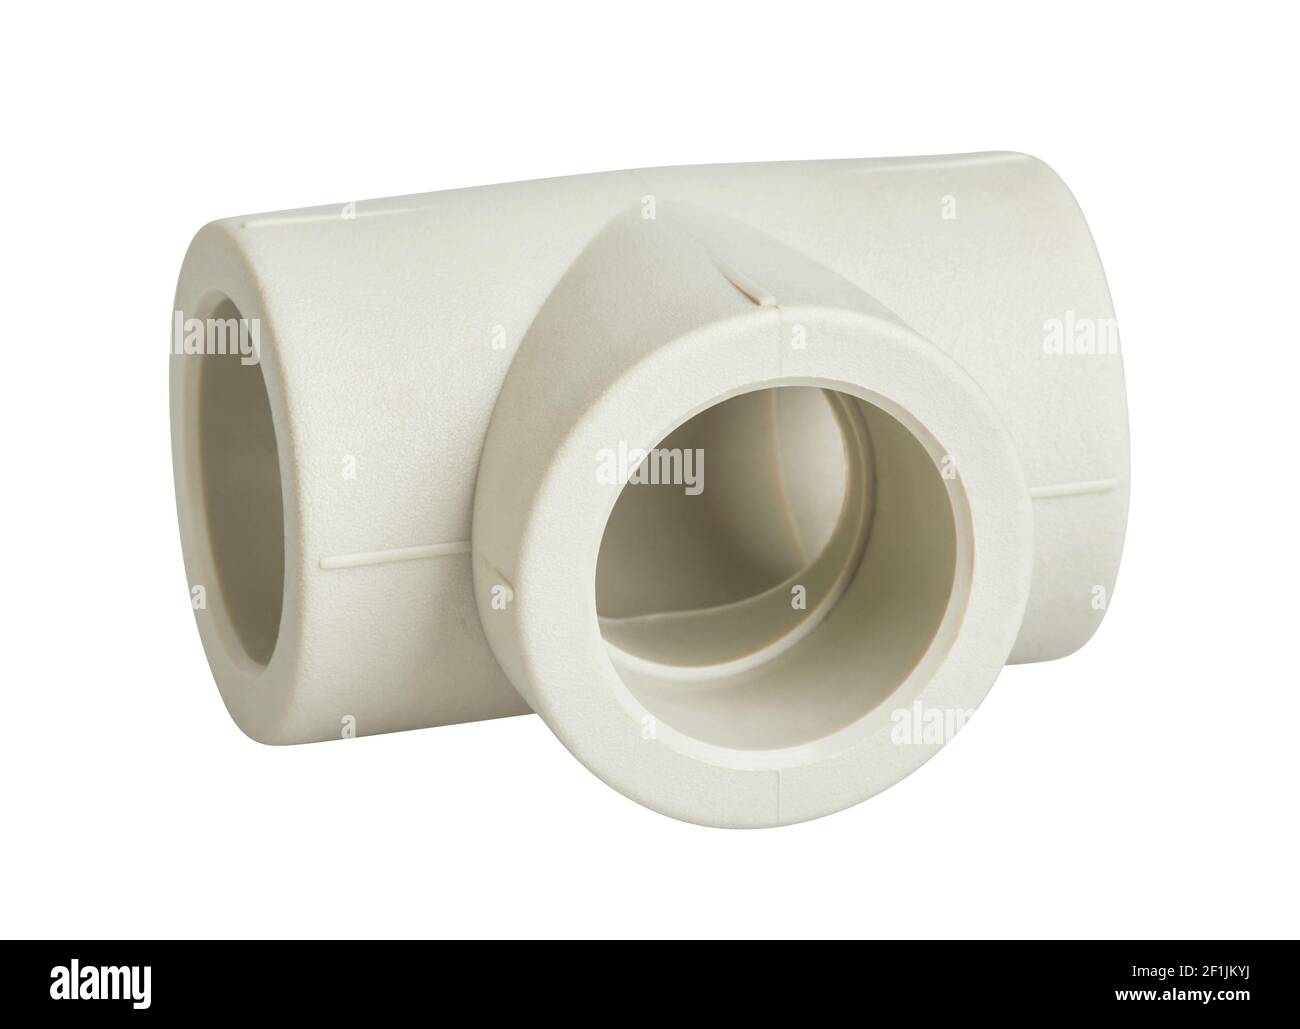 PVC house plumbing drain pipe tee connector isolated on a white background with clipping path. Pipe fitting, spare part Stock Photo